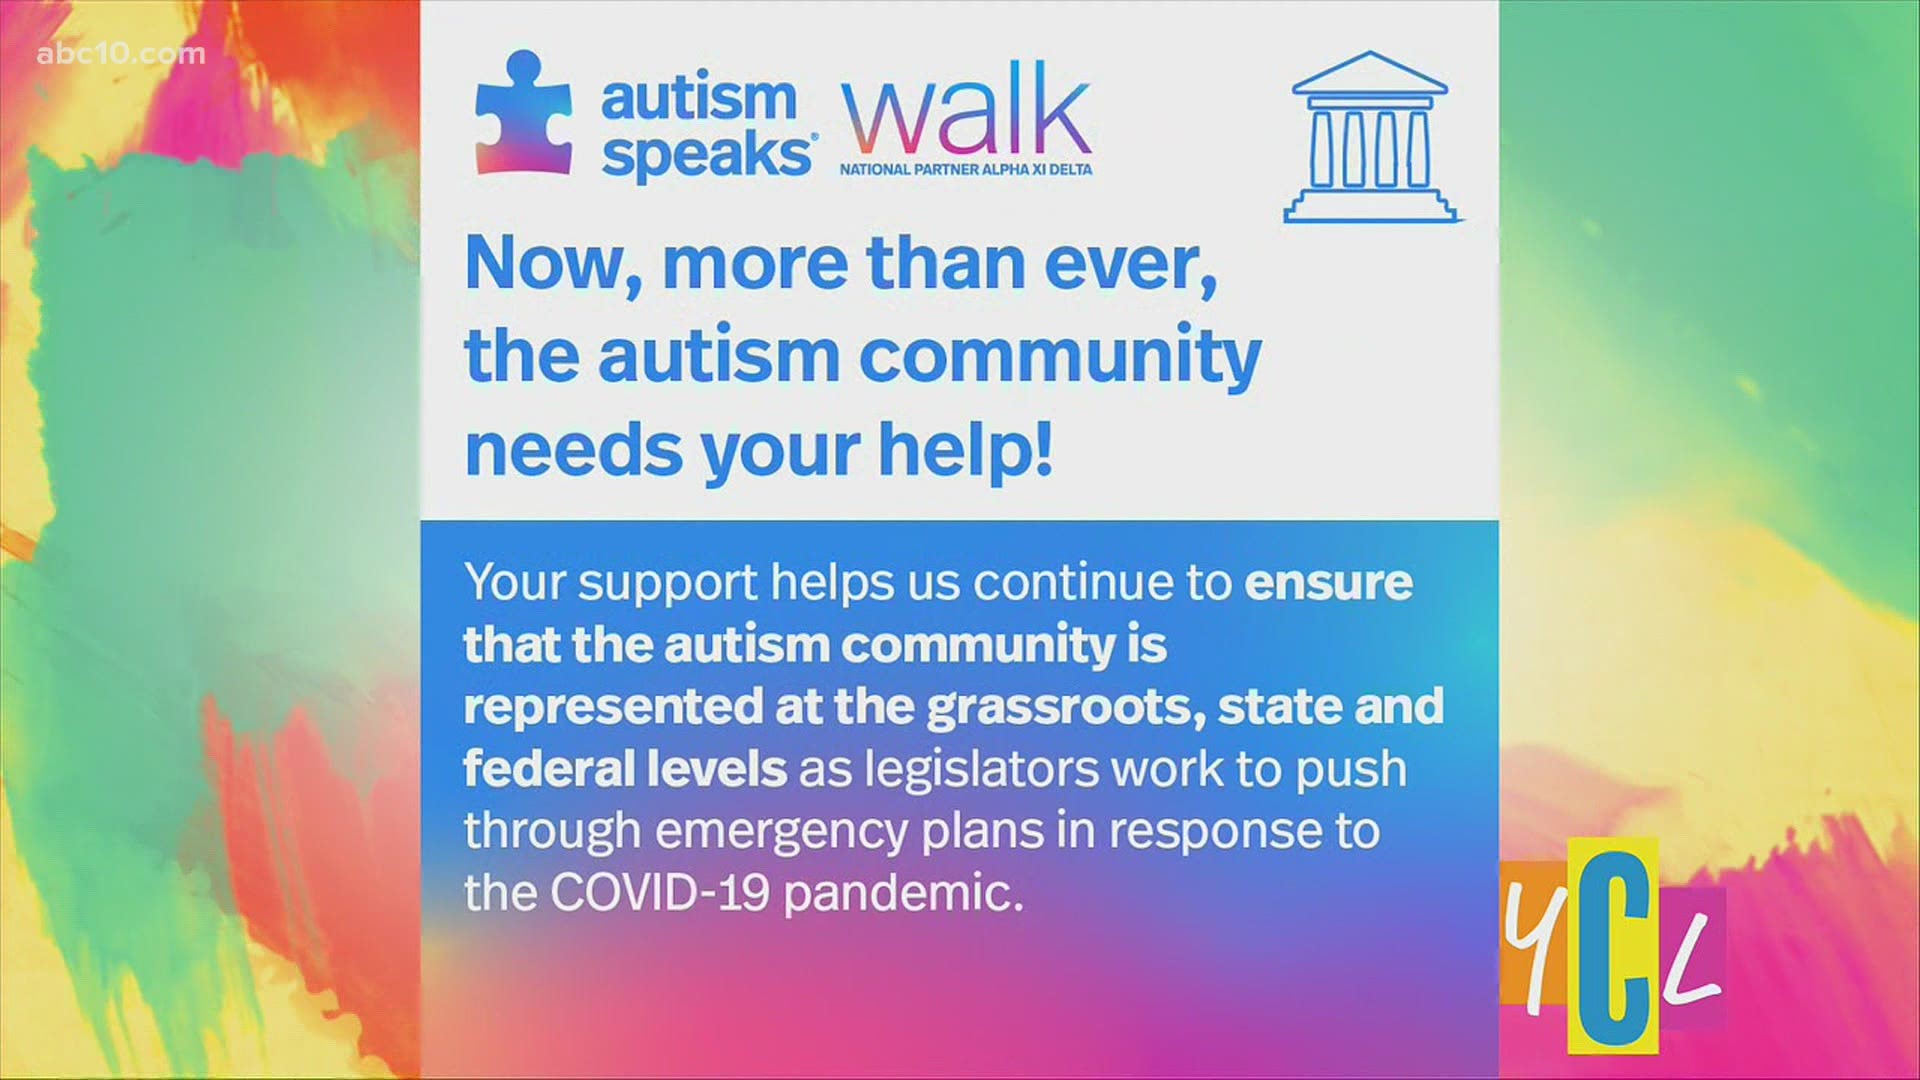 Autism Speaks Walk is the world’s largest fundraising event to support